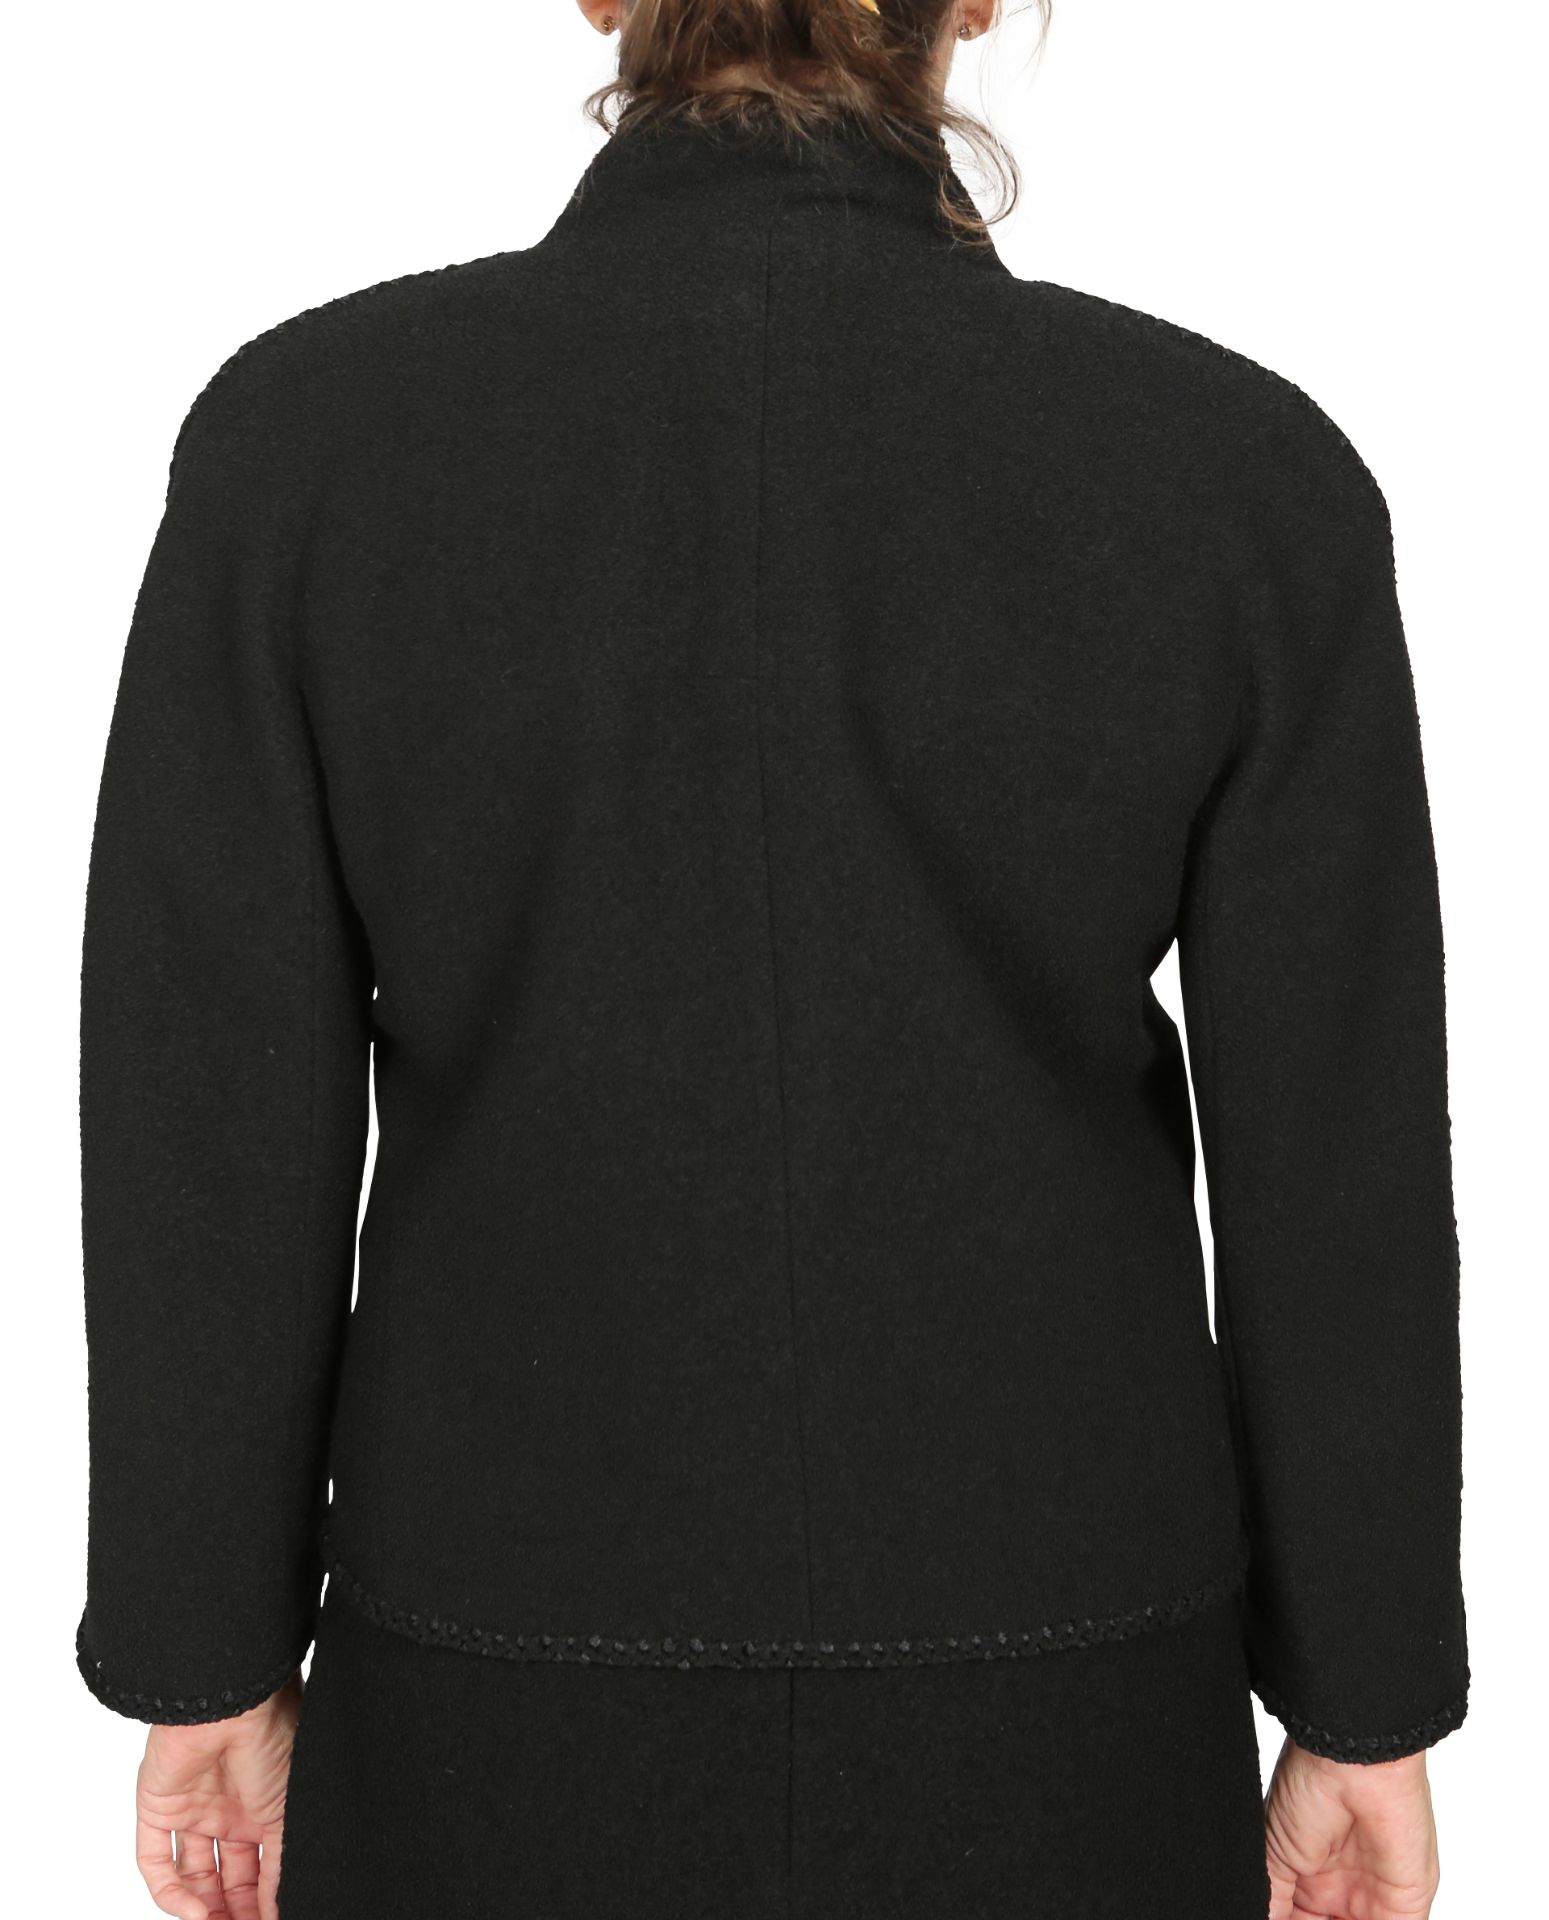 CHANEL, A BLACK WOOL JACKET - Image 3 of 5